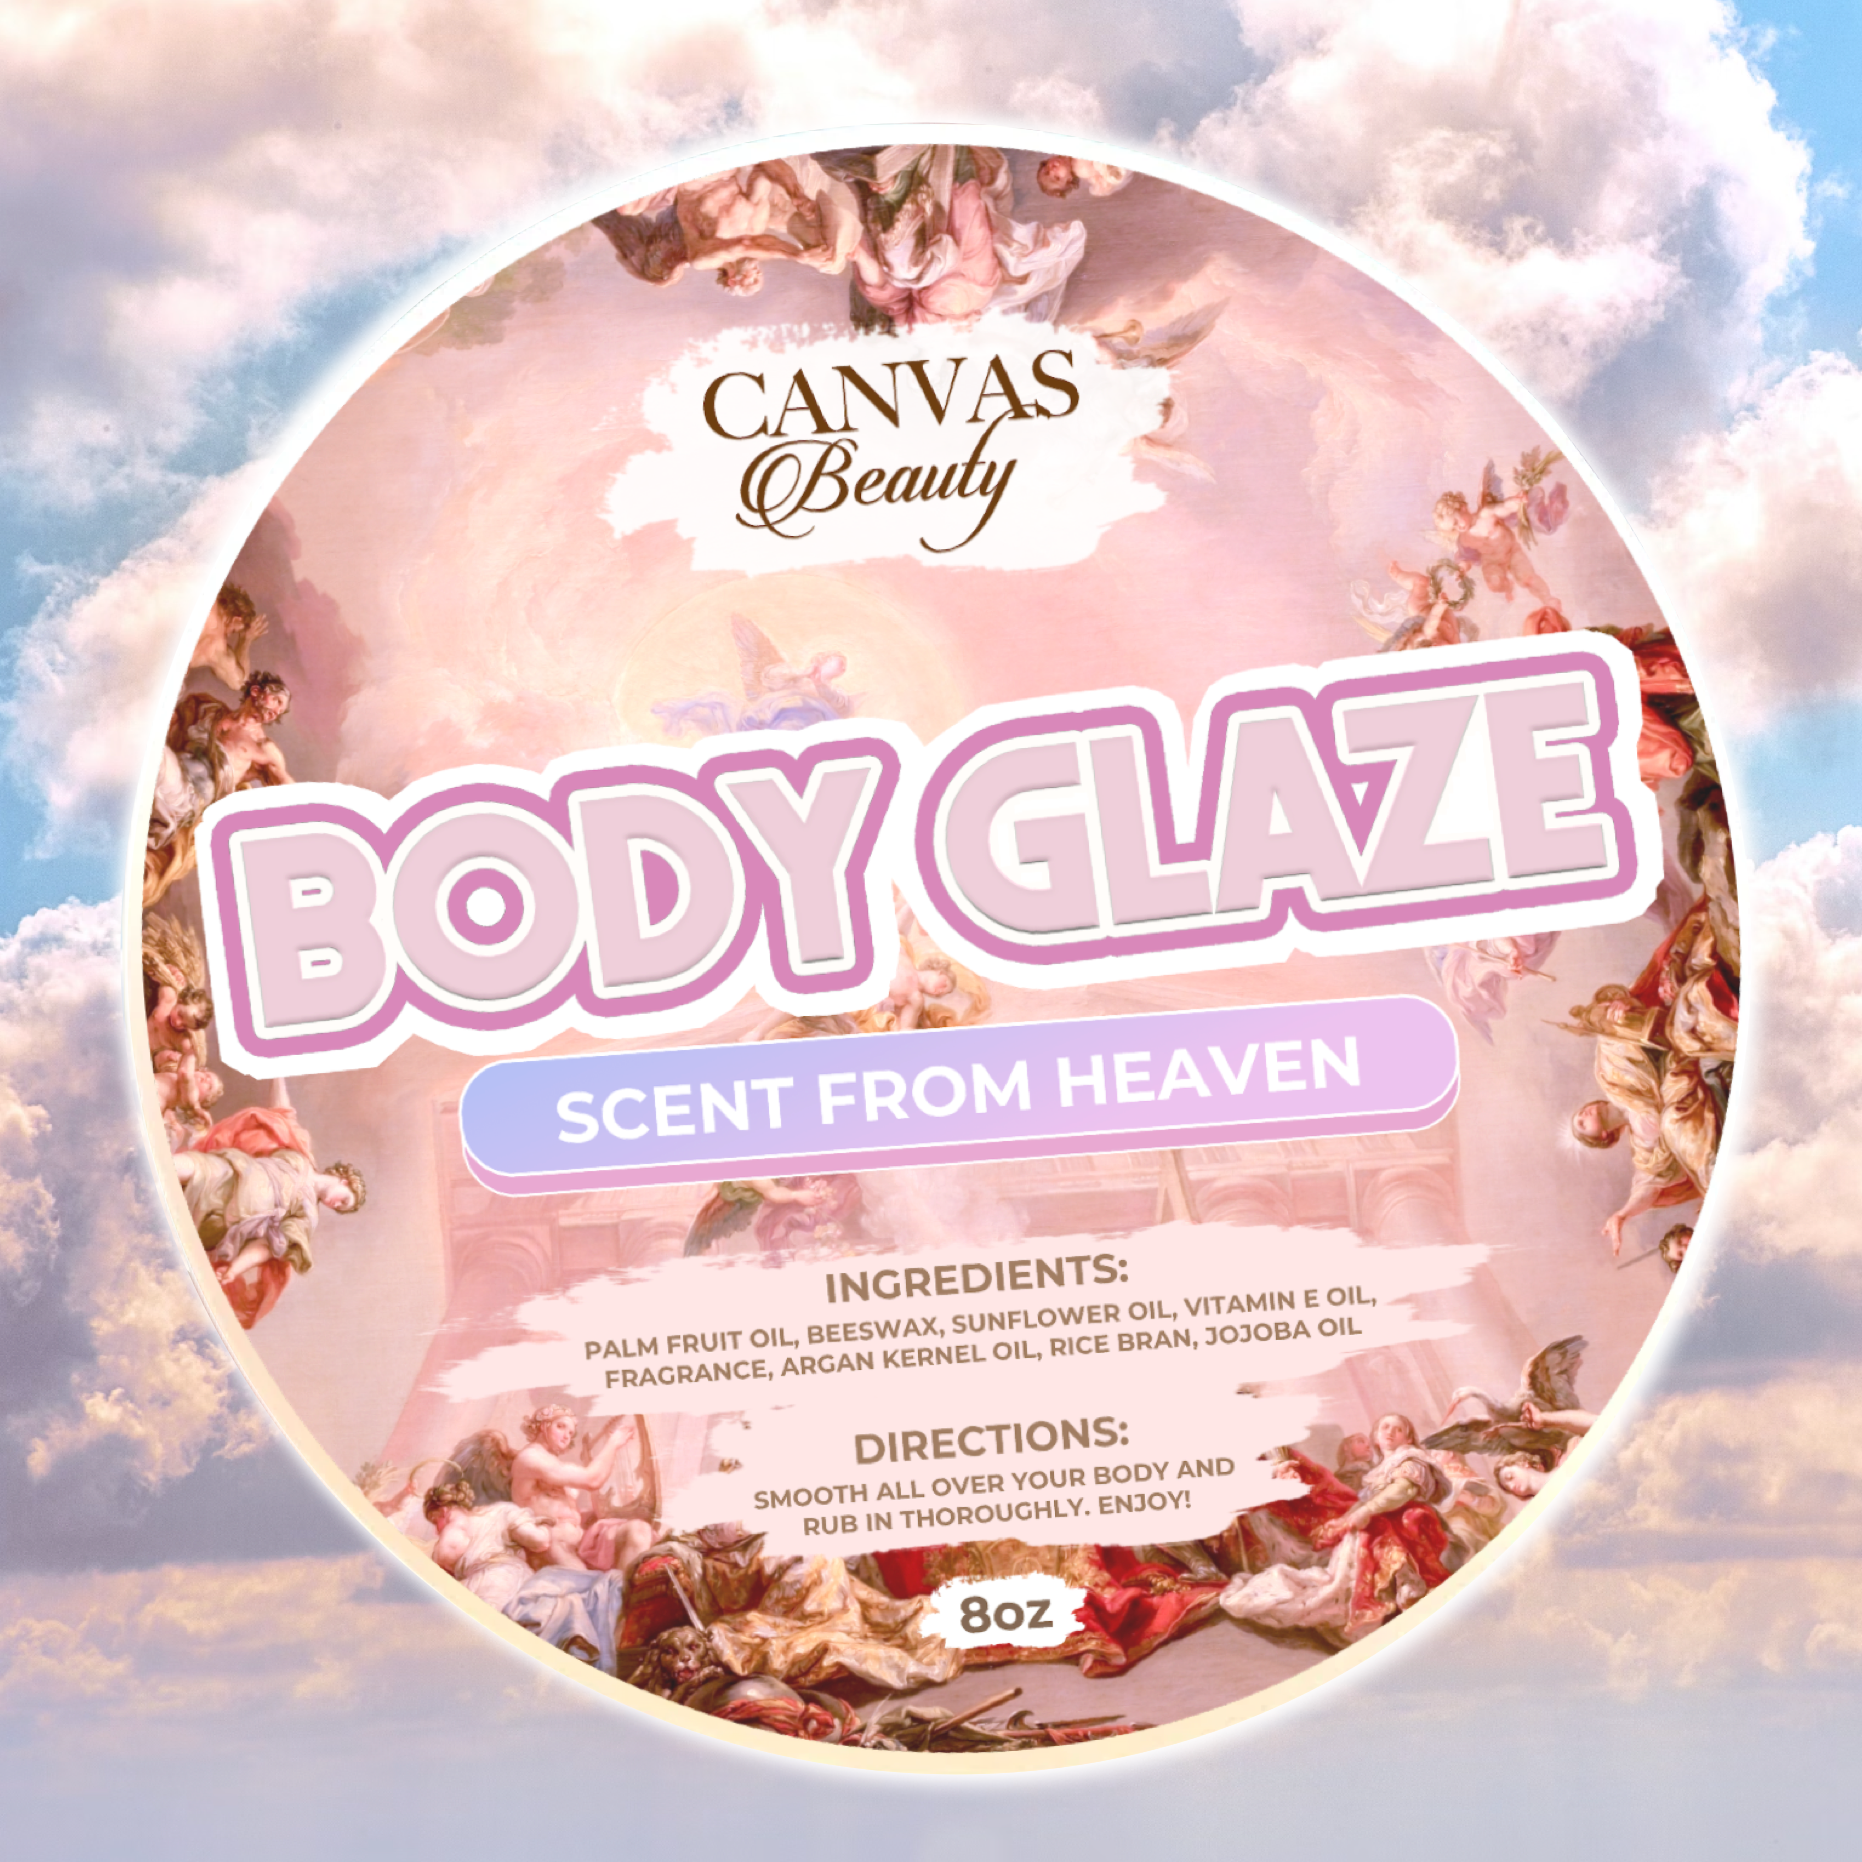 (NEW) BODY GLAZE – Scent from Heaven Limited Edition